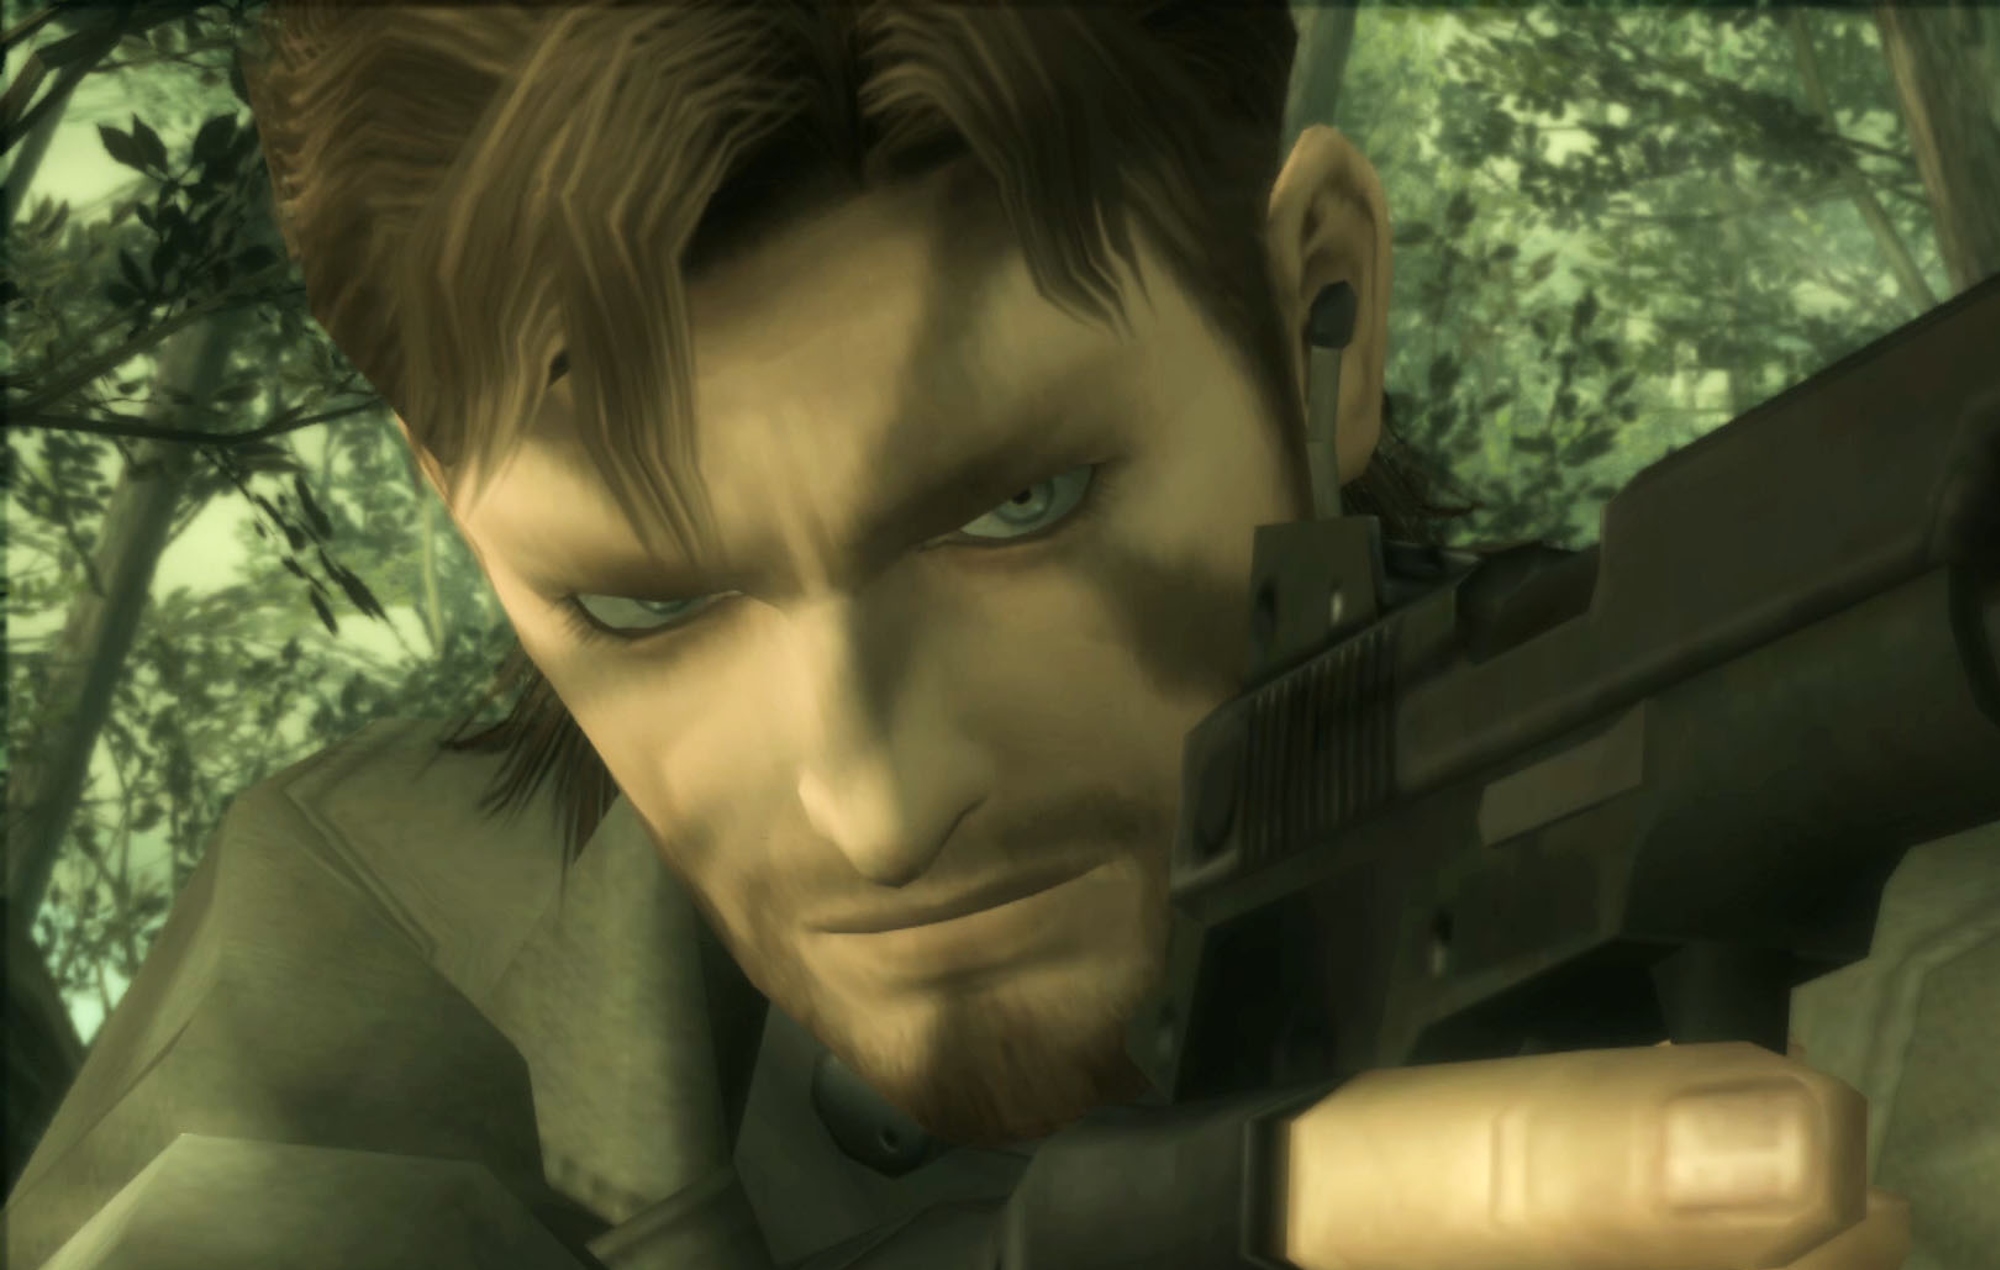 ‘Metal Gear Solid 4’ fans discover potential remaster in ‘Master Collection’